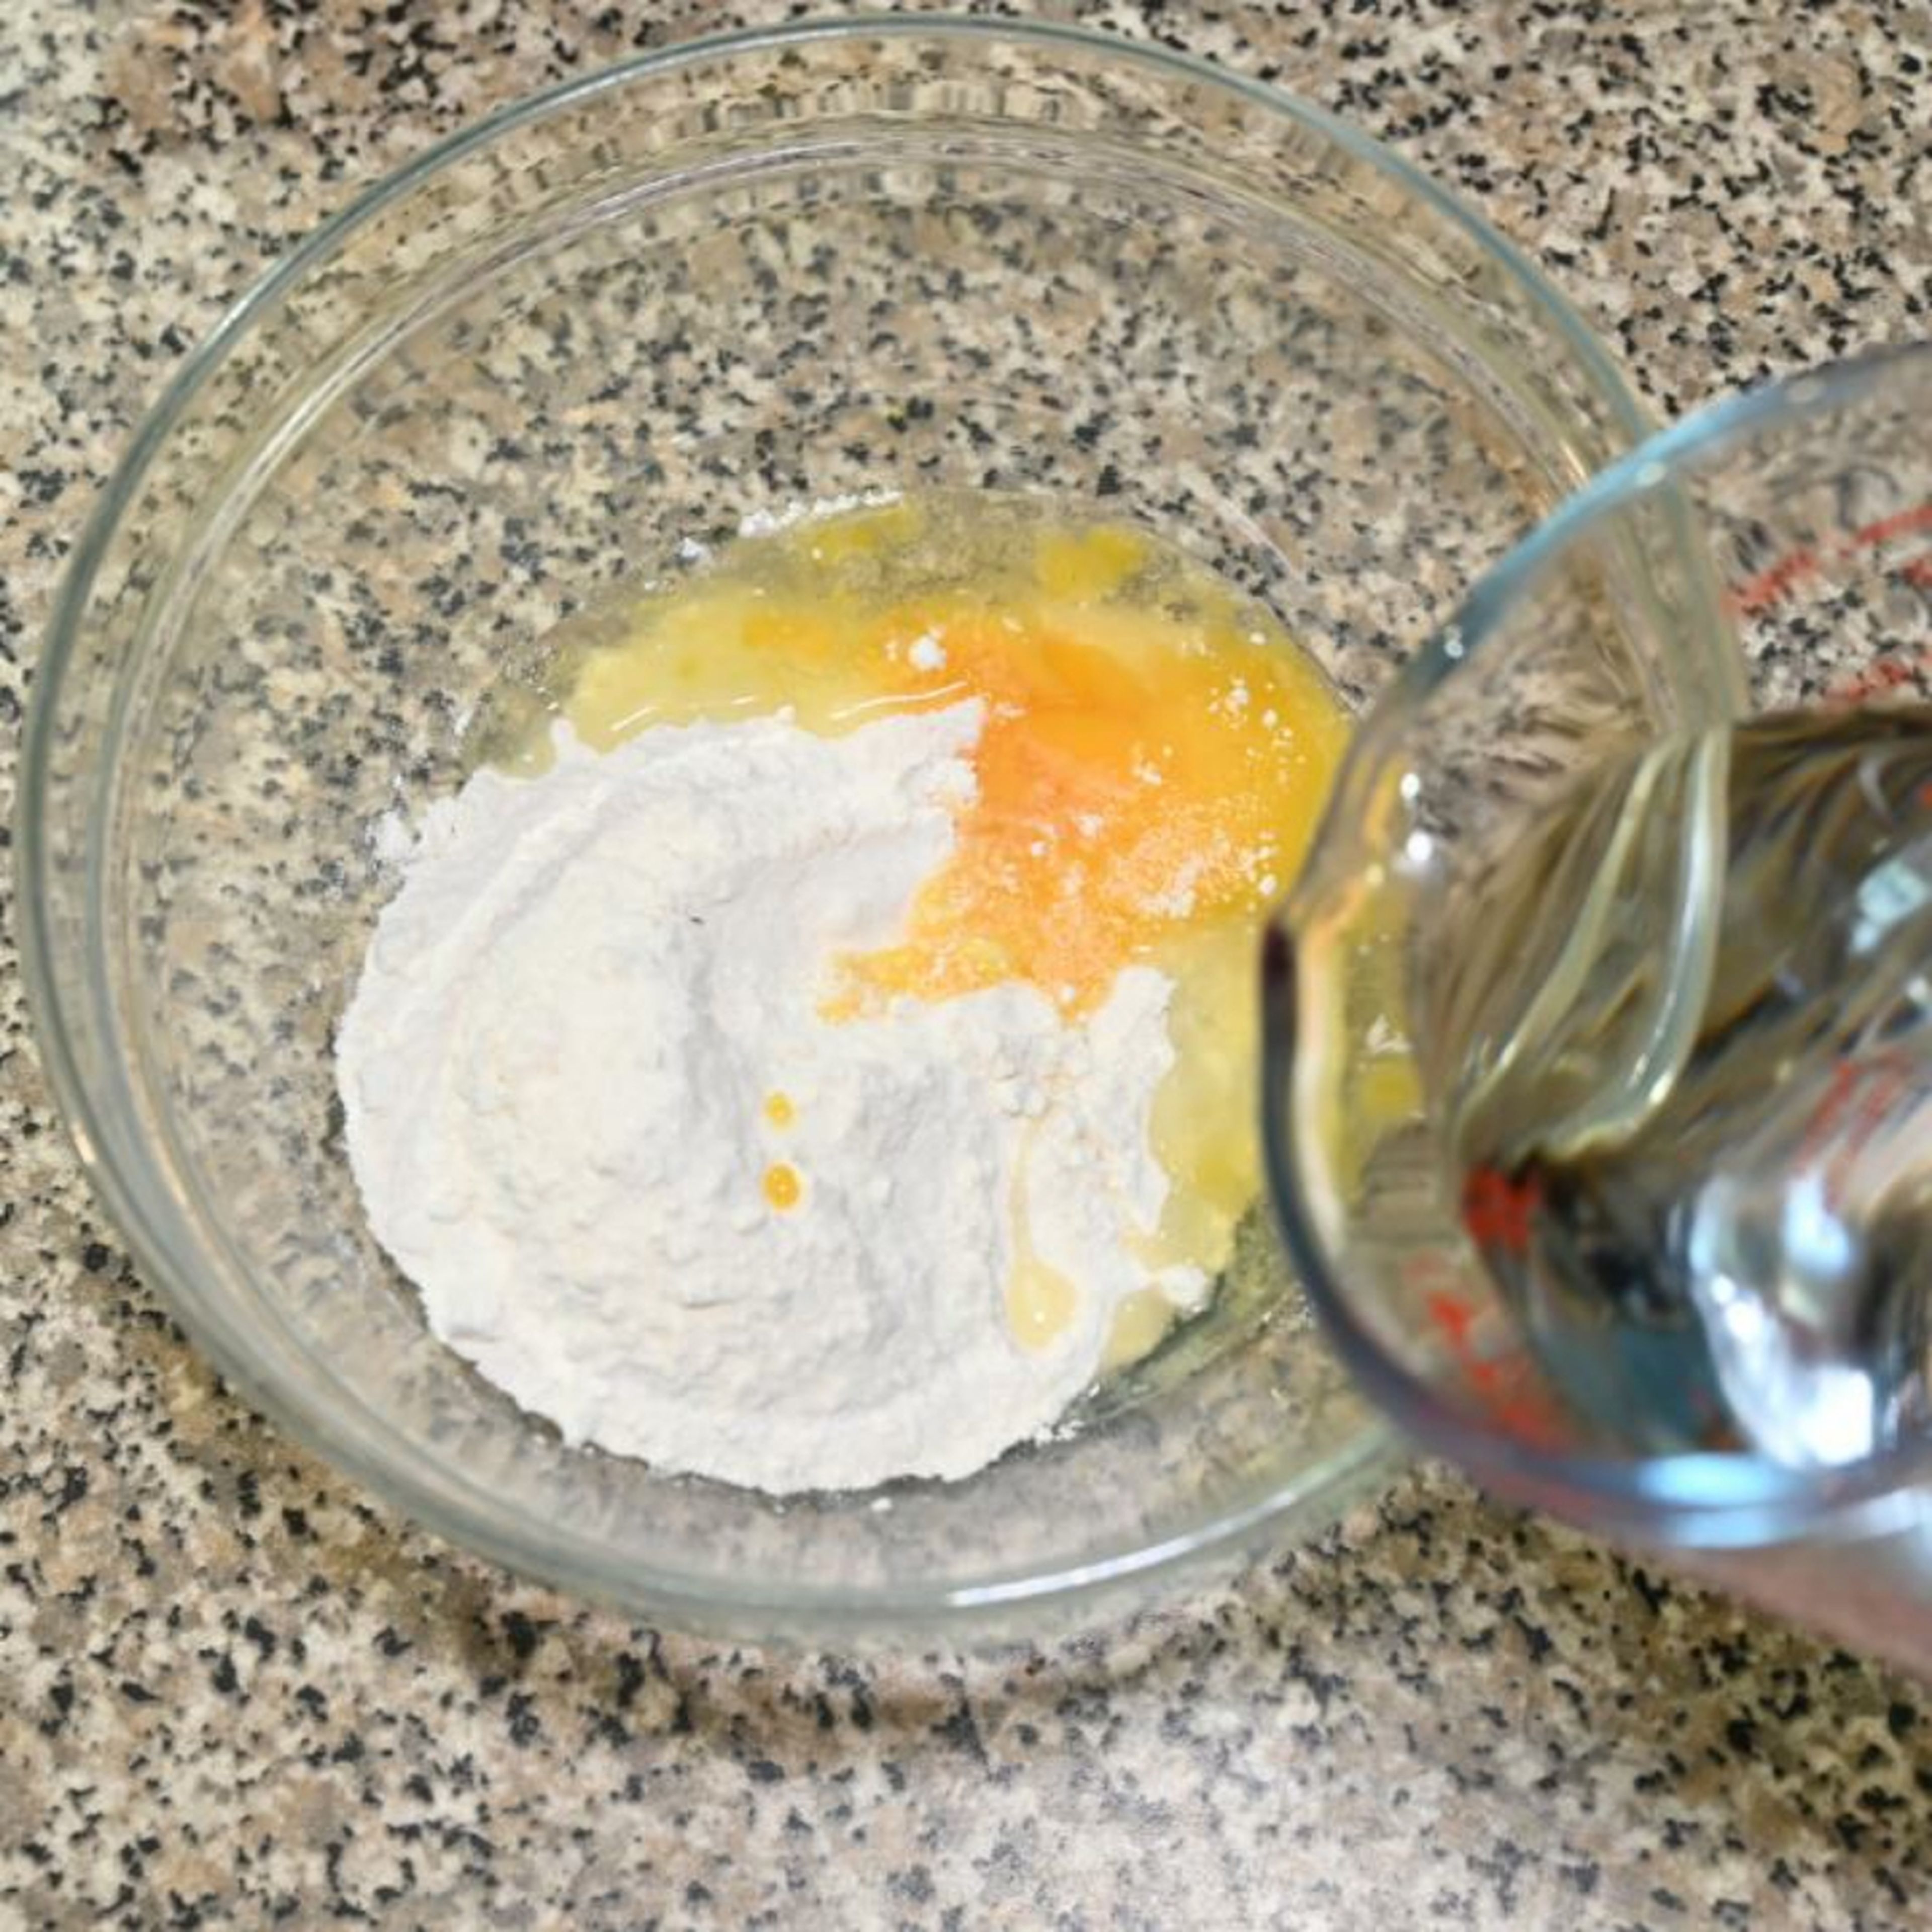 Prepare the coating batter: in a bowl add the flour, egg and a pinch of salt and gradually add water to get a thick consistency.